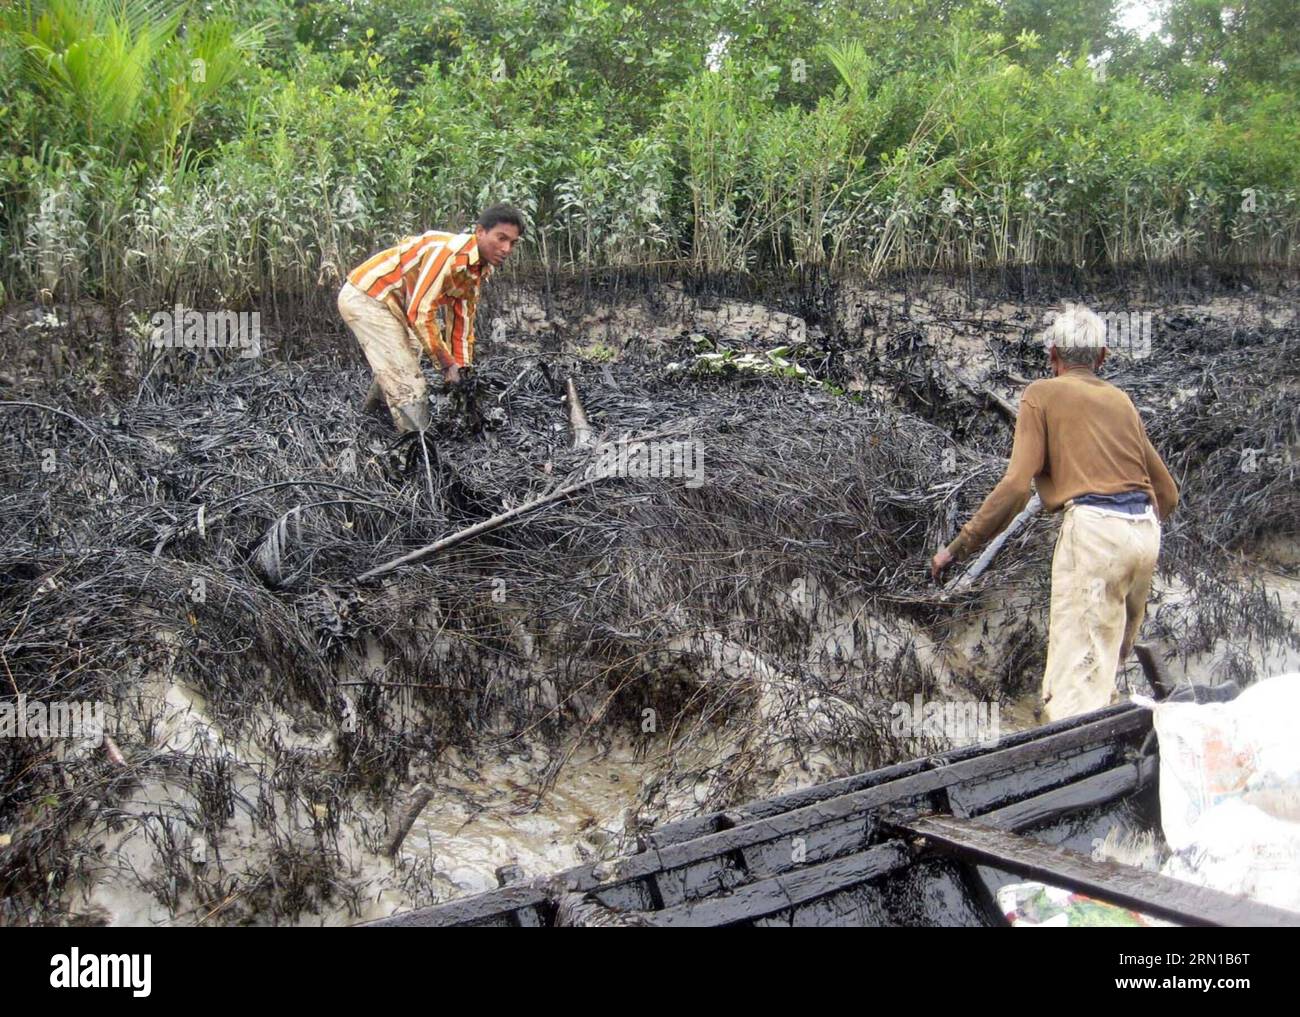 (141213) -- DHAKA, Dec. 13, 2014 () -- Local people work to remove the layer of oil on the mangrove forest in the Shela River in Bangladesh, on Dec. 13, 2014. A 50-km oil slick coated the Shela River flowing through the Bangladeshi part of the world s largest mangrove forest on Thursday after a fuel-laden barge sank two days ago following collision with a heavy tanker. Officials said the authorities have already been working to remove the layer of oil that seeped in the world s largest mangrove forest -- Sundarbans. () BANGLADESH-MASSIVE SPILL-MANGROVE FOREST Xinhua PUBLICATIONxNOTxINxCHN   Dh Stock Photo